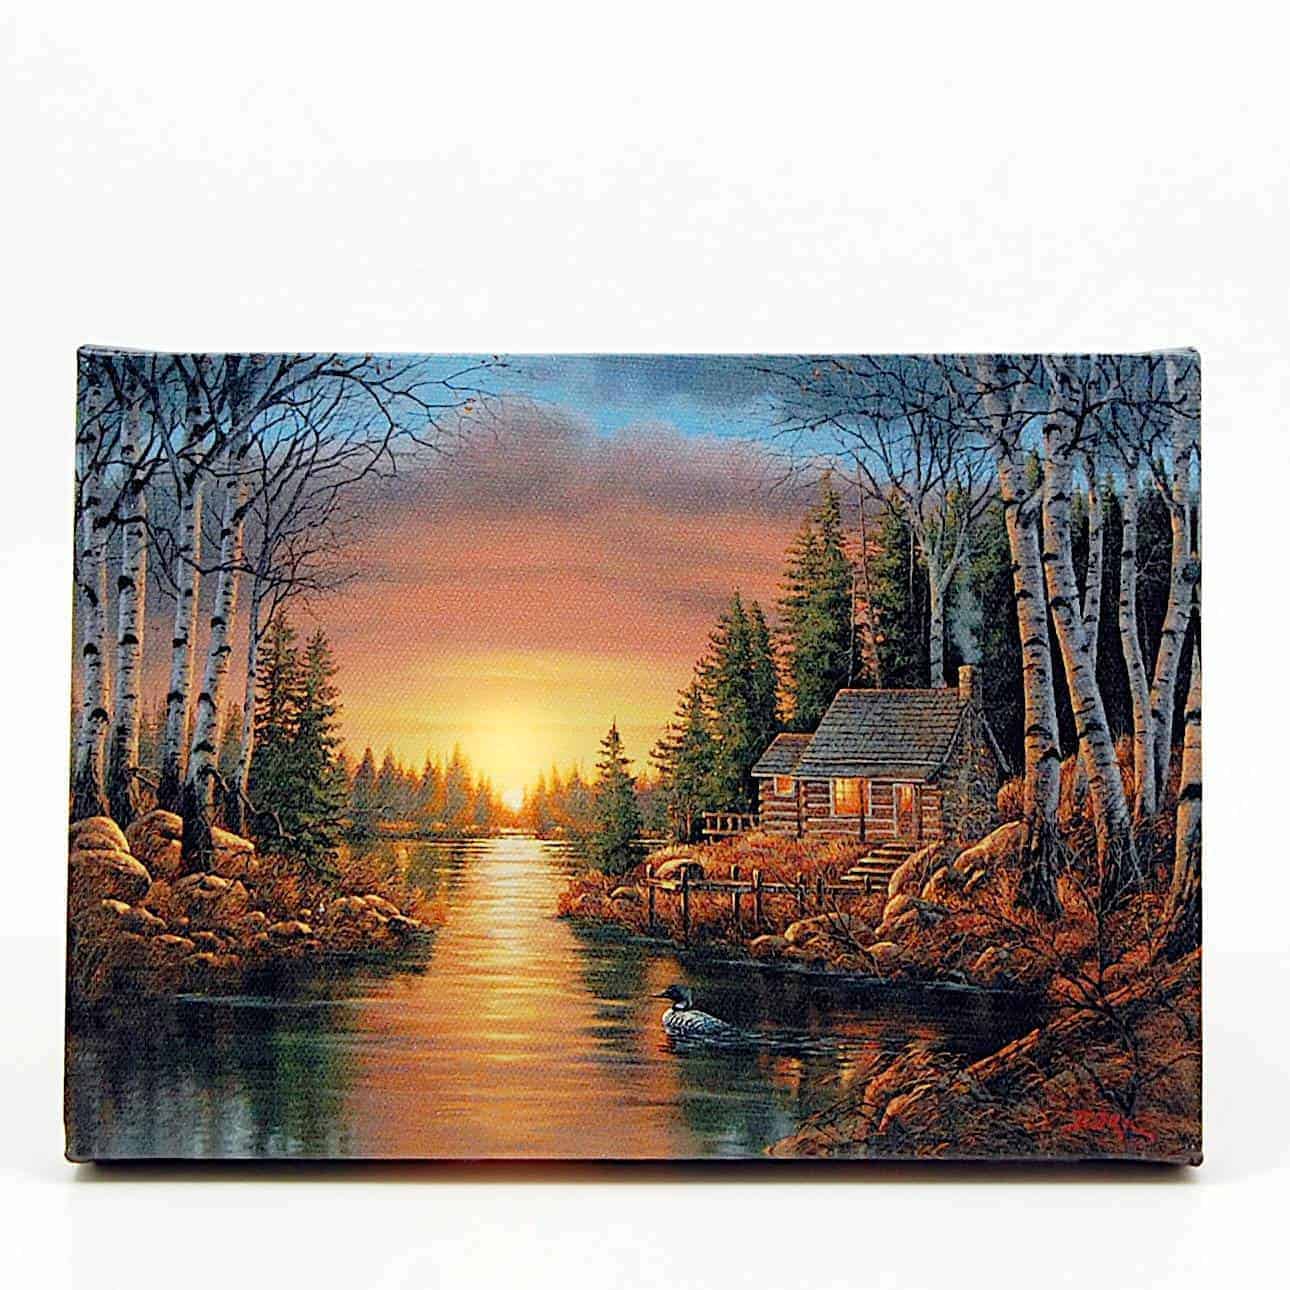 This Cabin On River in Woods LED Light Up Lighted Canvas Wall or Tabletop Picture Art is made with love by Premier Homegoods! Shop more unique gift ideas today with Spots Initiatives, the best way to support creators.